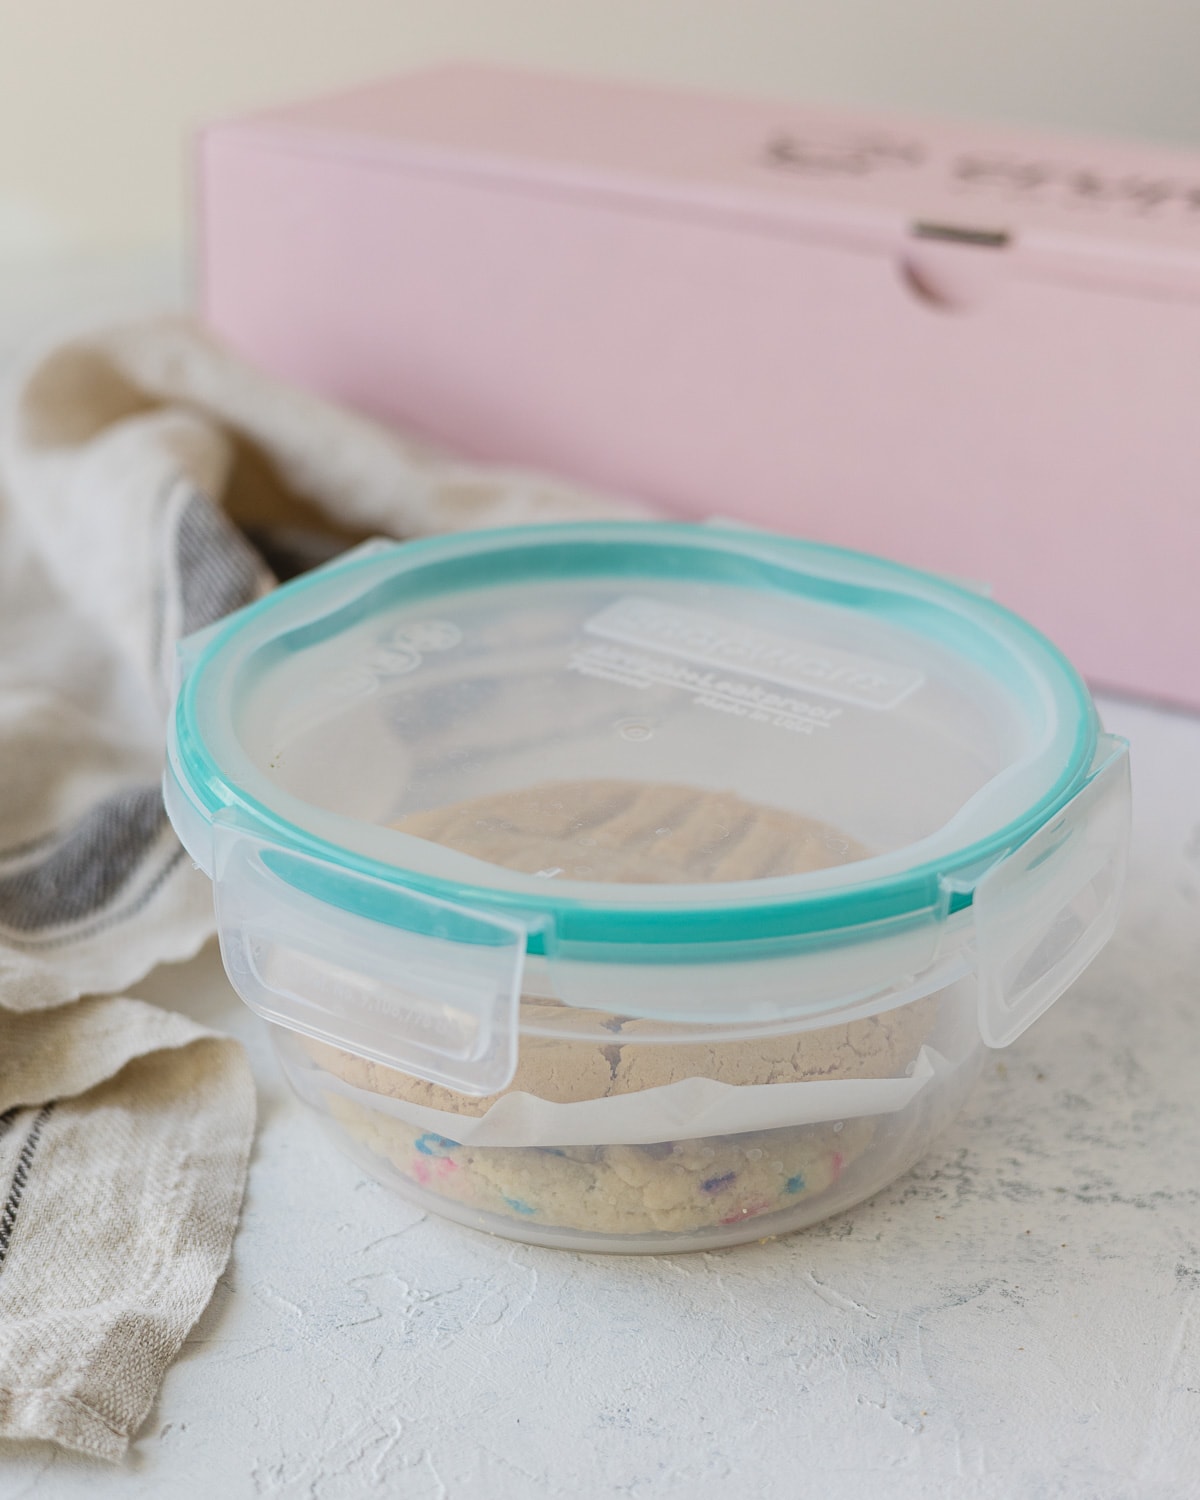 A closed plastic container with cookies inside separated by parchment paper.